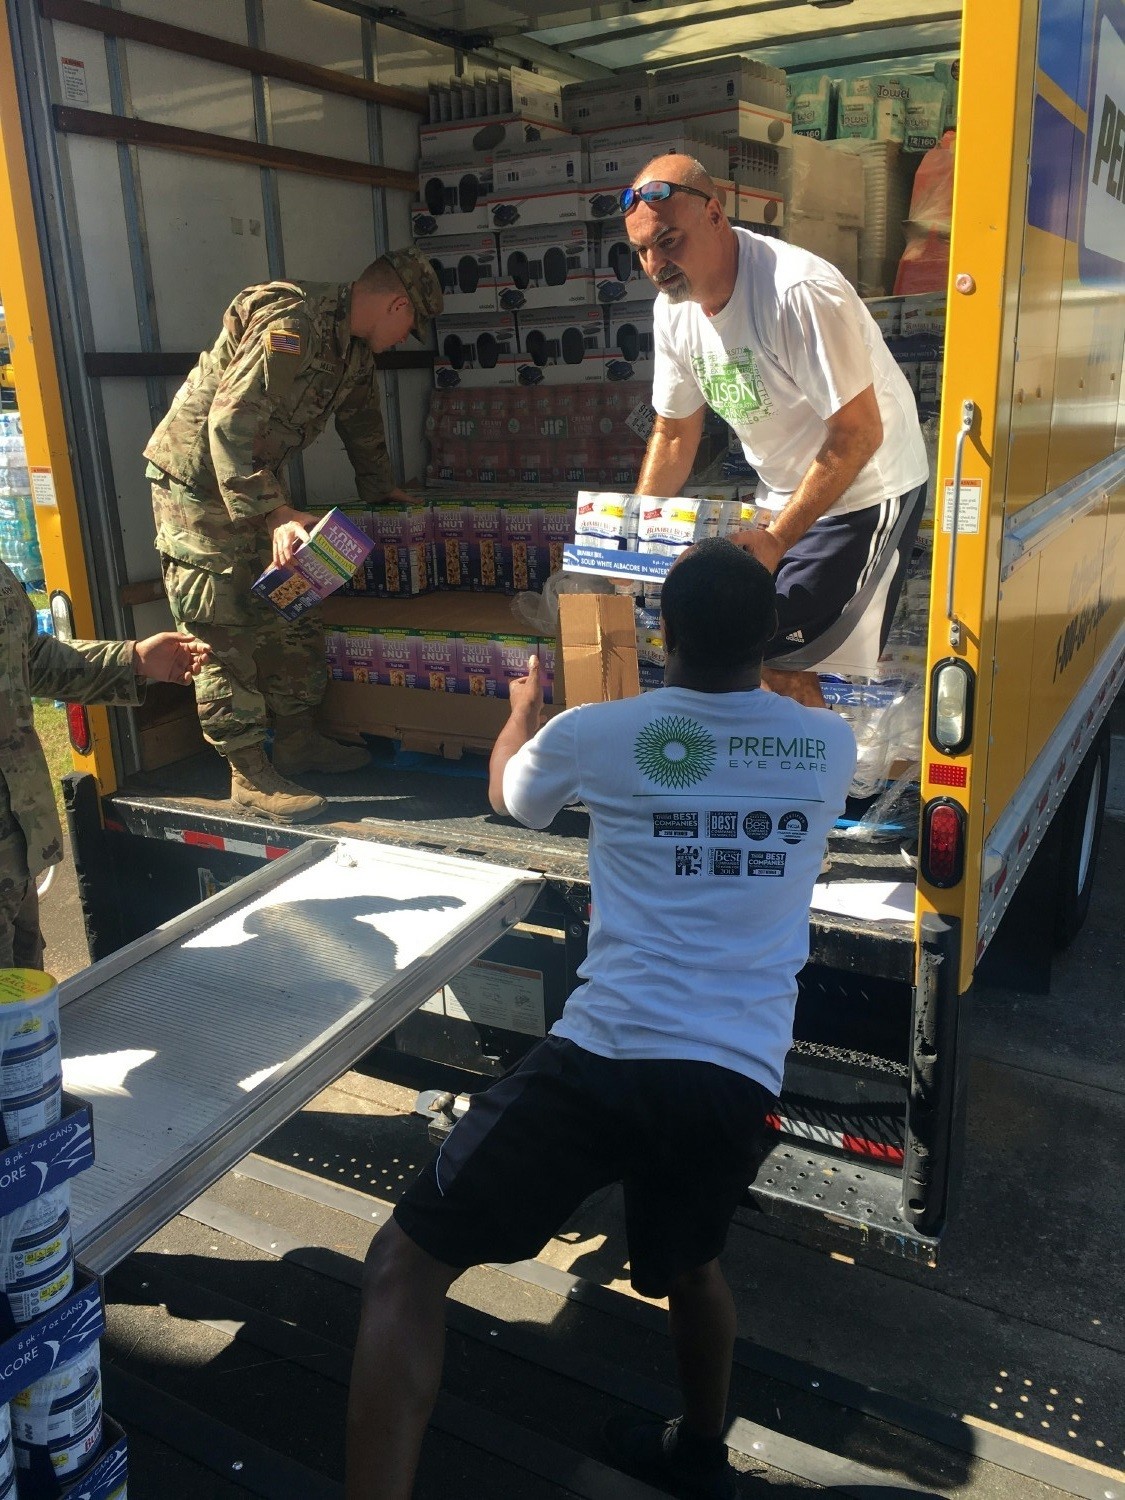 Premier Team delivering supplies to communities impacted by Hurricane Michael